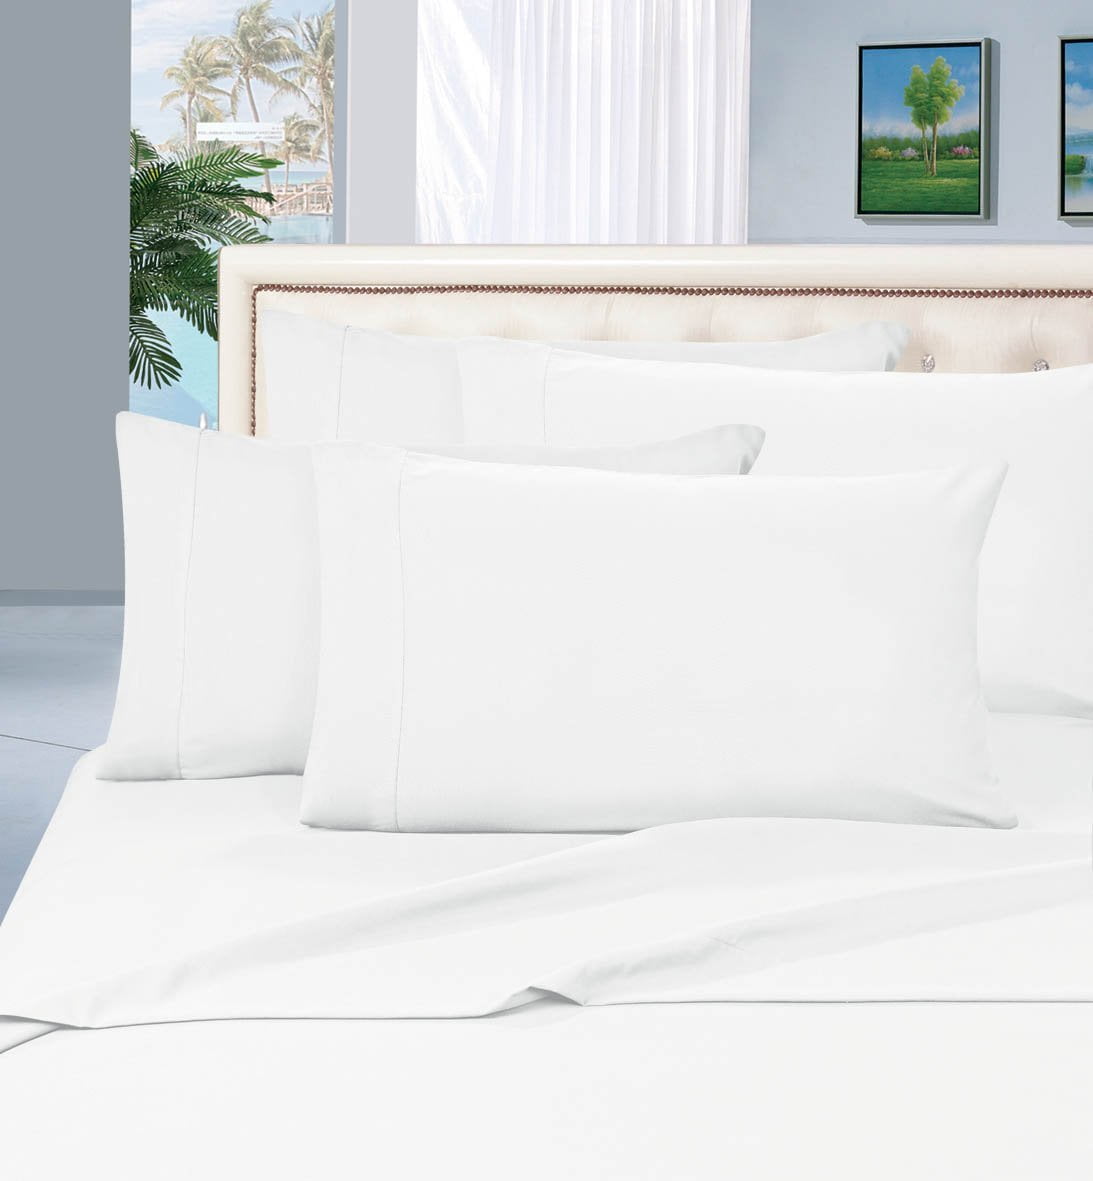 Luxury Ultra-Soft 2-Piece Pillowcase Set 1500 Thread Count Egyptian Quality Microfiber White - Wrinkle Resistant King Size Double Brushed